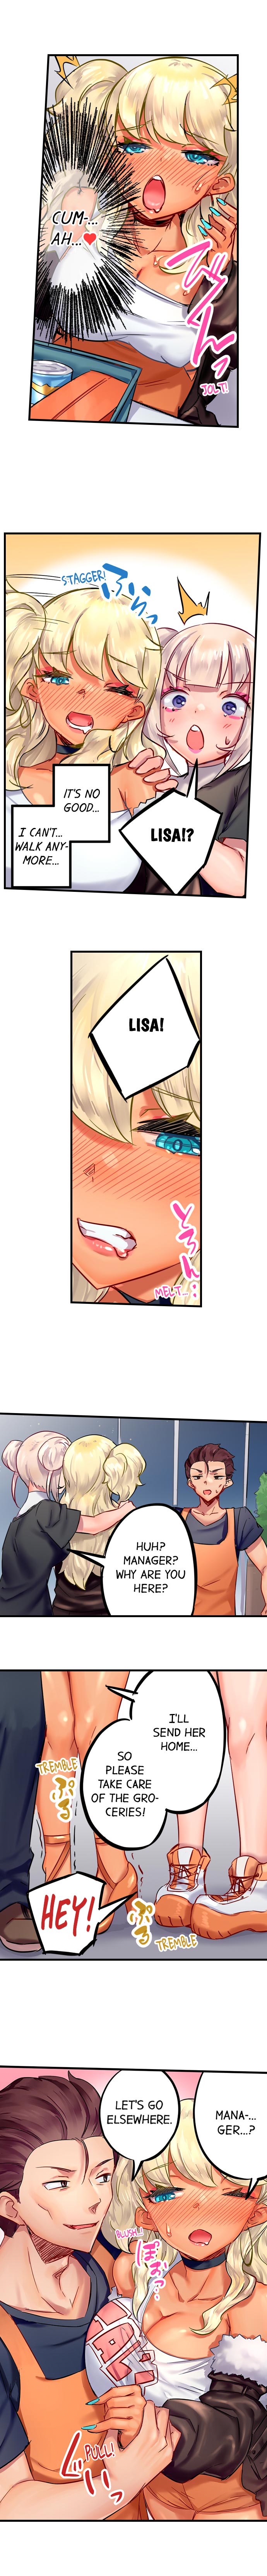 Orgasm Management for This Tanned Girl - Chapter 7 Page 9